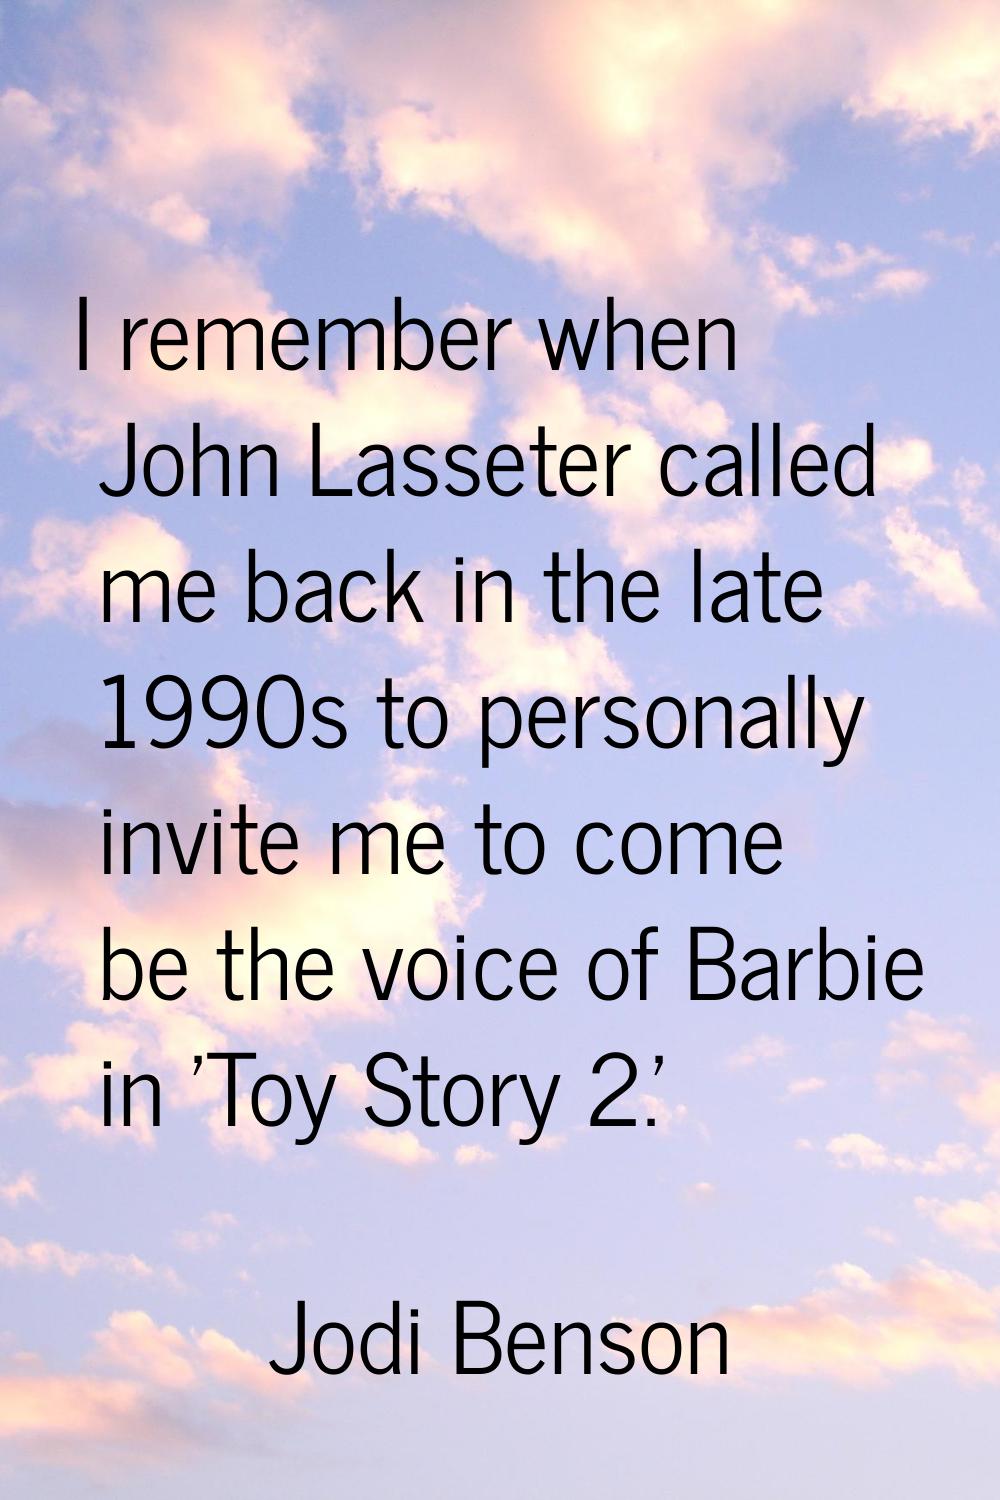 I remember when John Lasseter called me back in the late 1990s to personally invite me to come be t